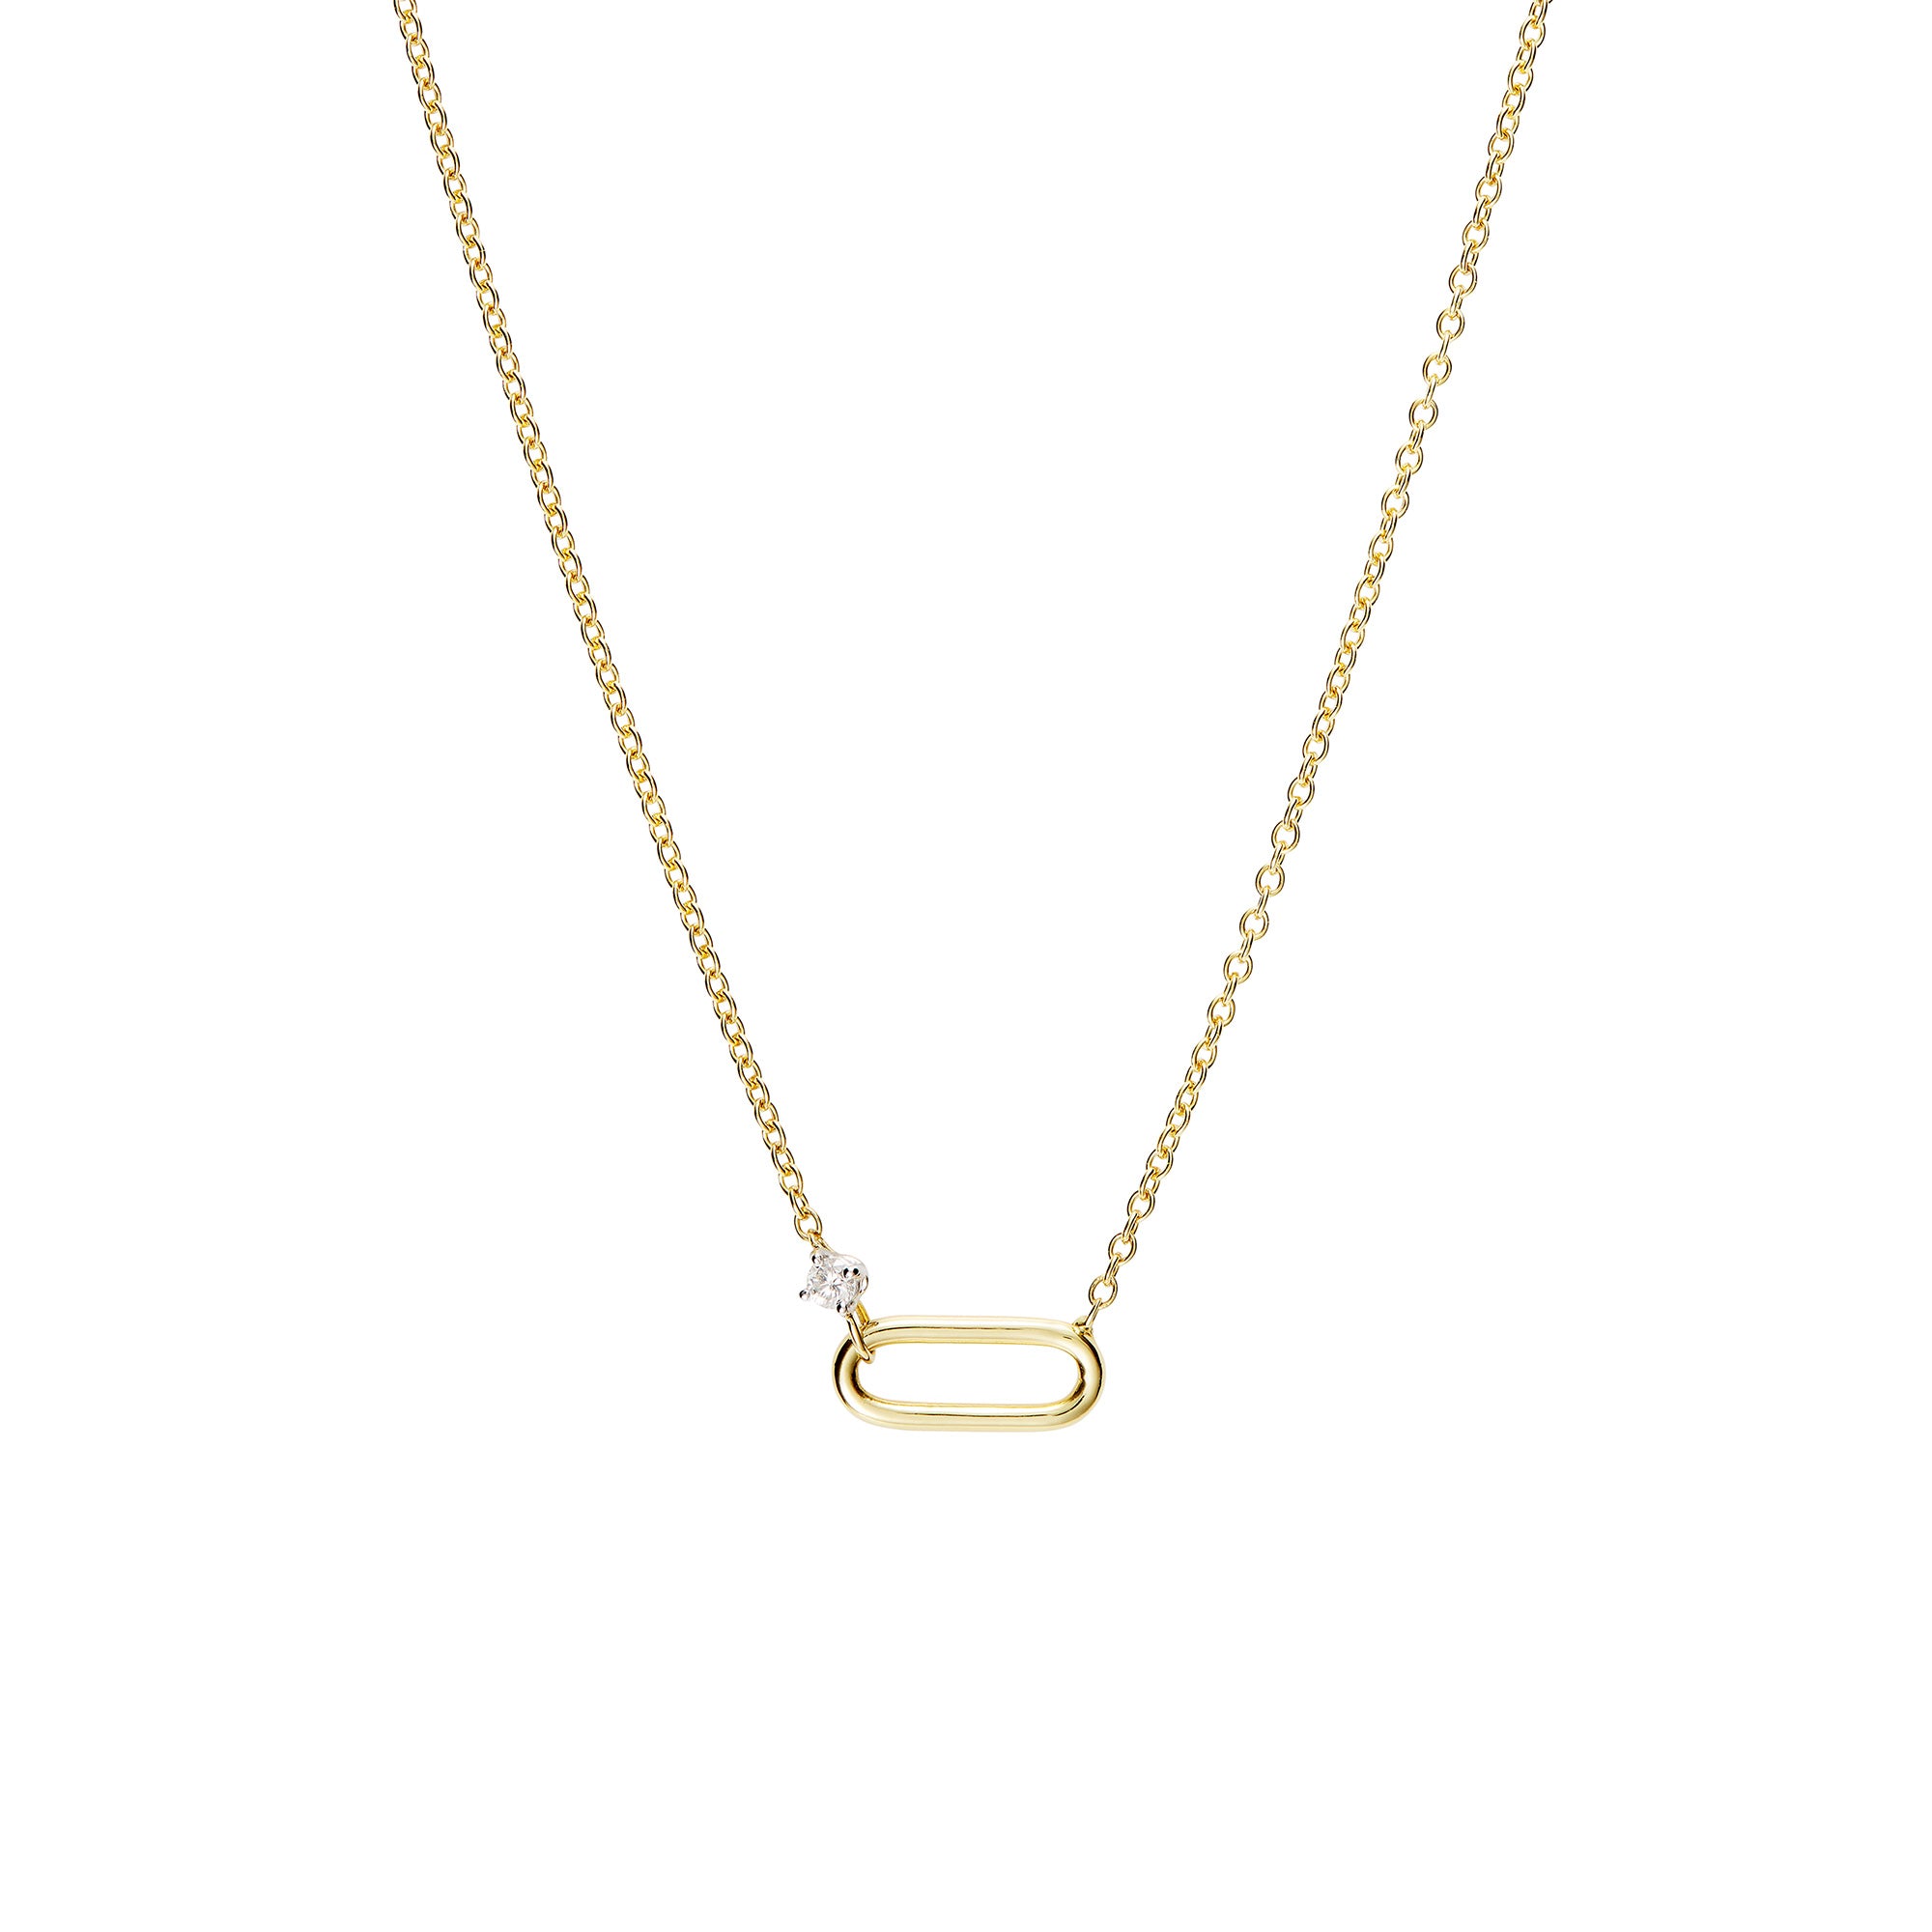 Paperclip necklace with diamond